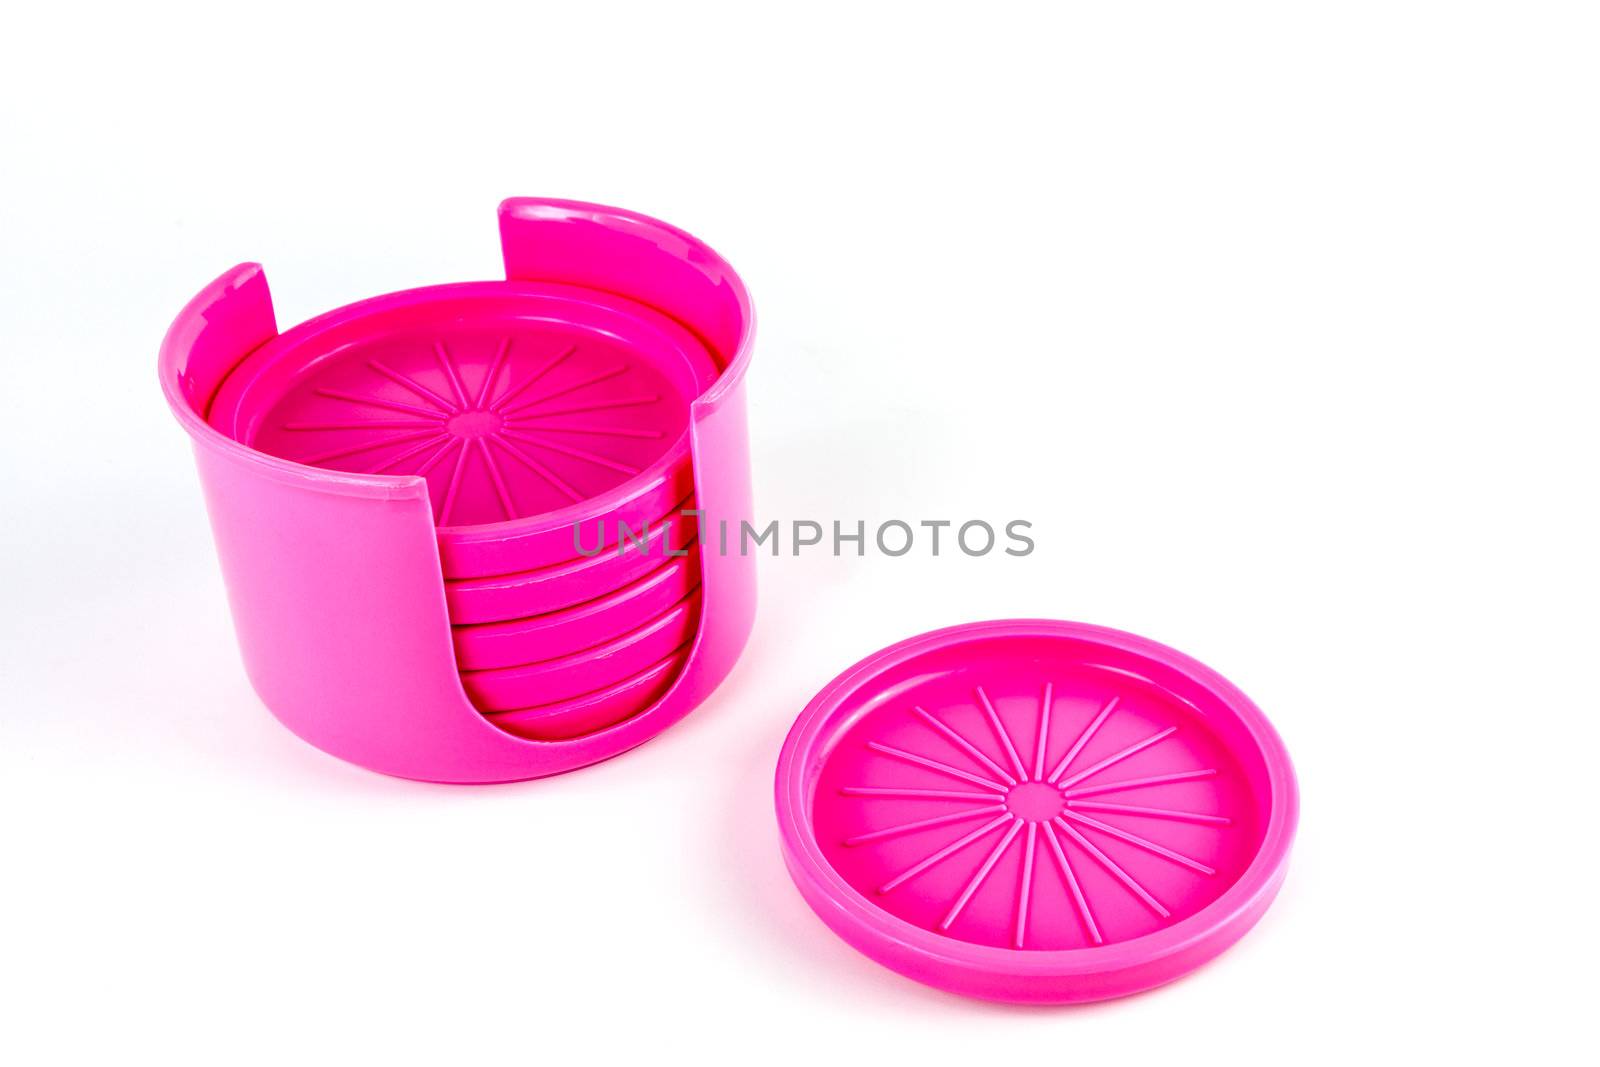 Pink plastic glass plates by bunwit